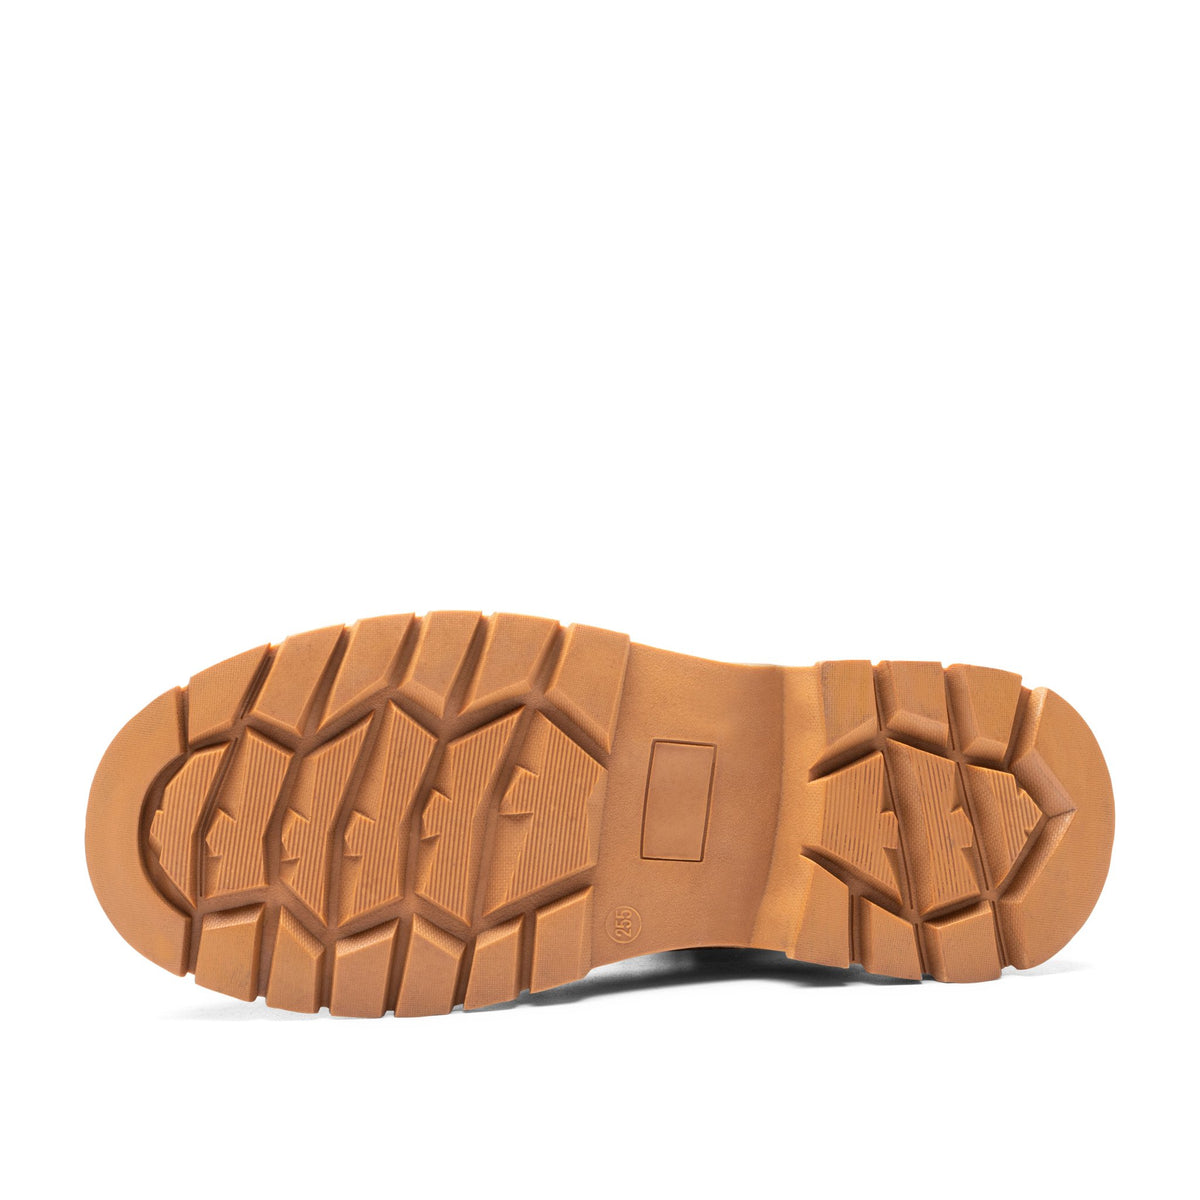 Hype Brown 2.0 - Indestructible Shoes